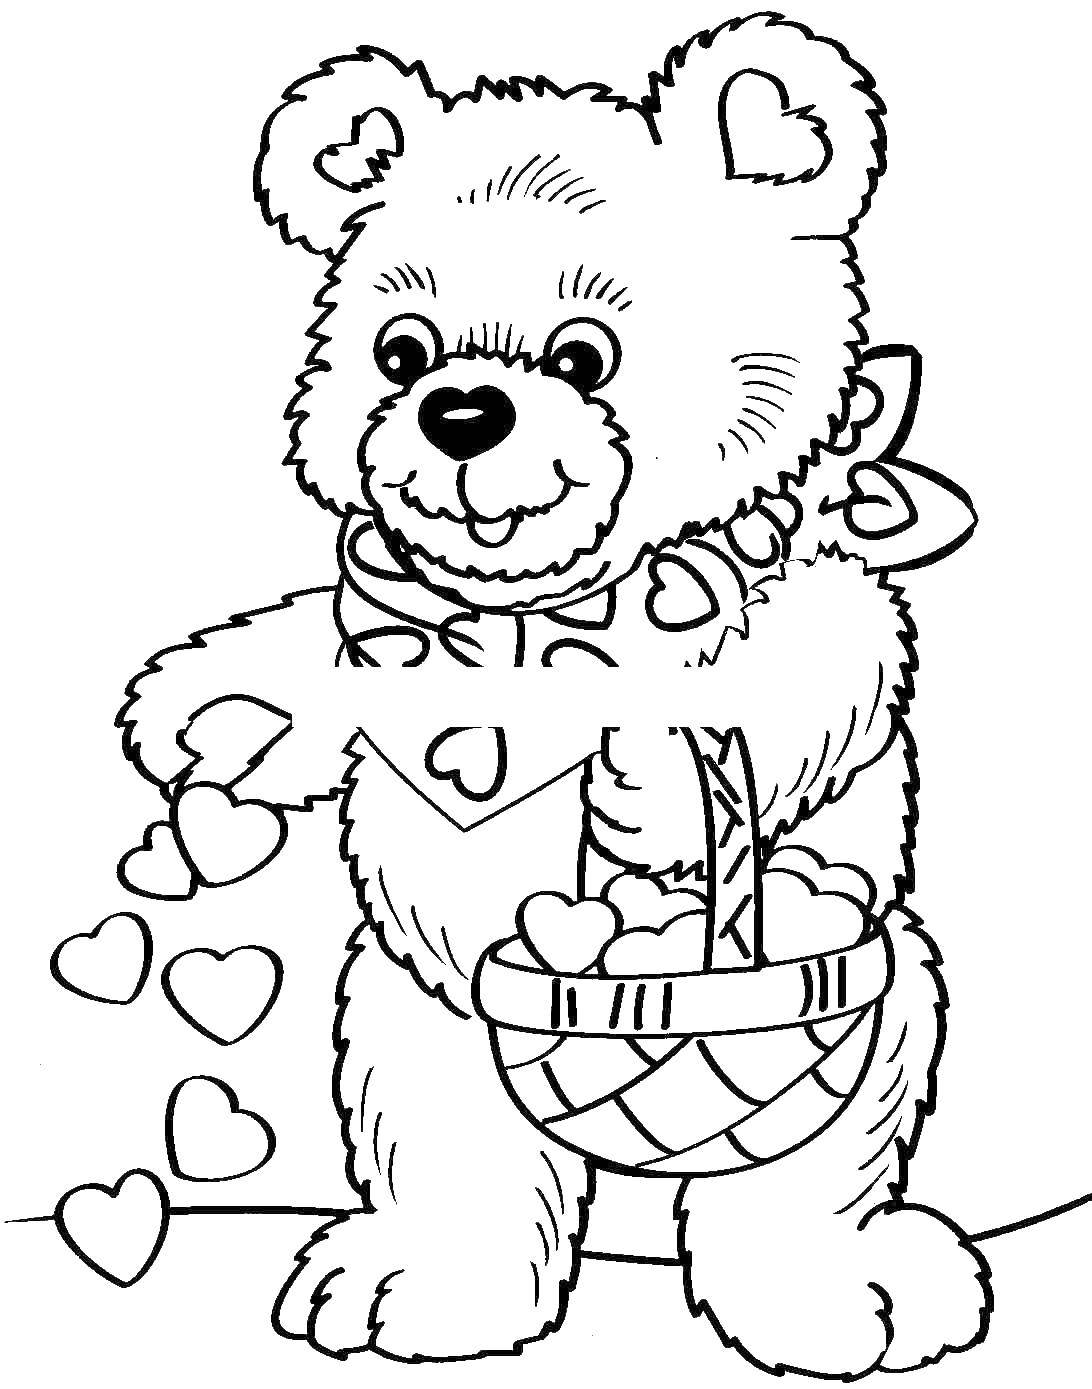 Coloring Bear collects hearts. Category Animals. Tags:  bear, heart.